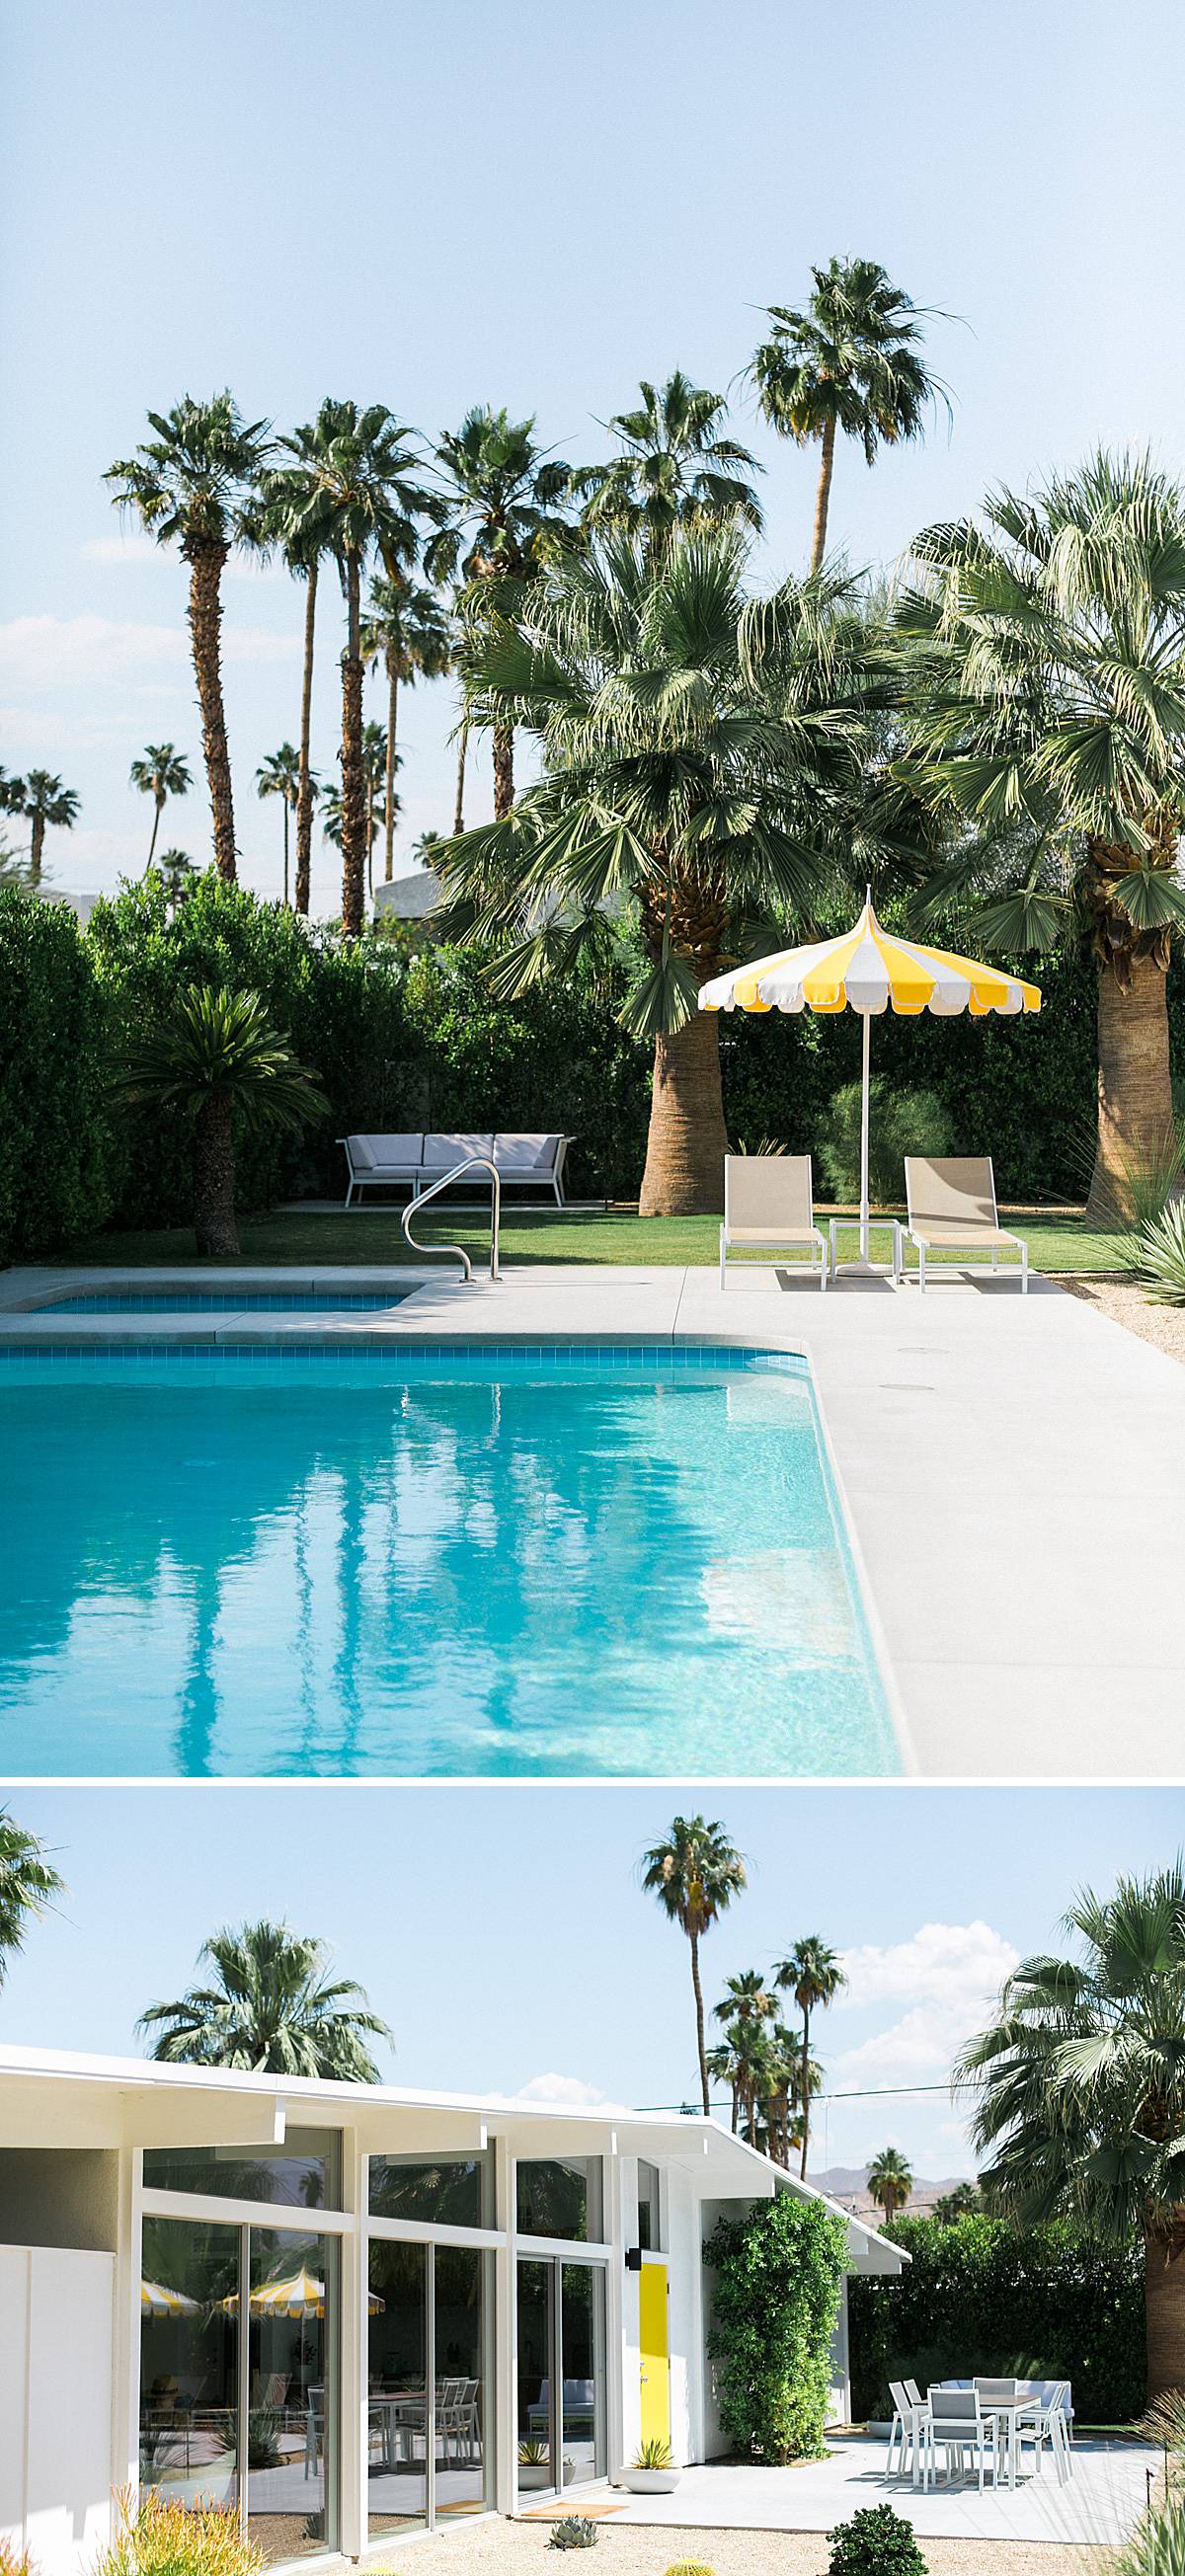 airbnb pool, Palm Springs desert destination Midwest photographer, travel, California girls trip with midcentury homes and pool, Joshua Tree National Park, photo by Laurelyn Savannah Photography